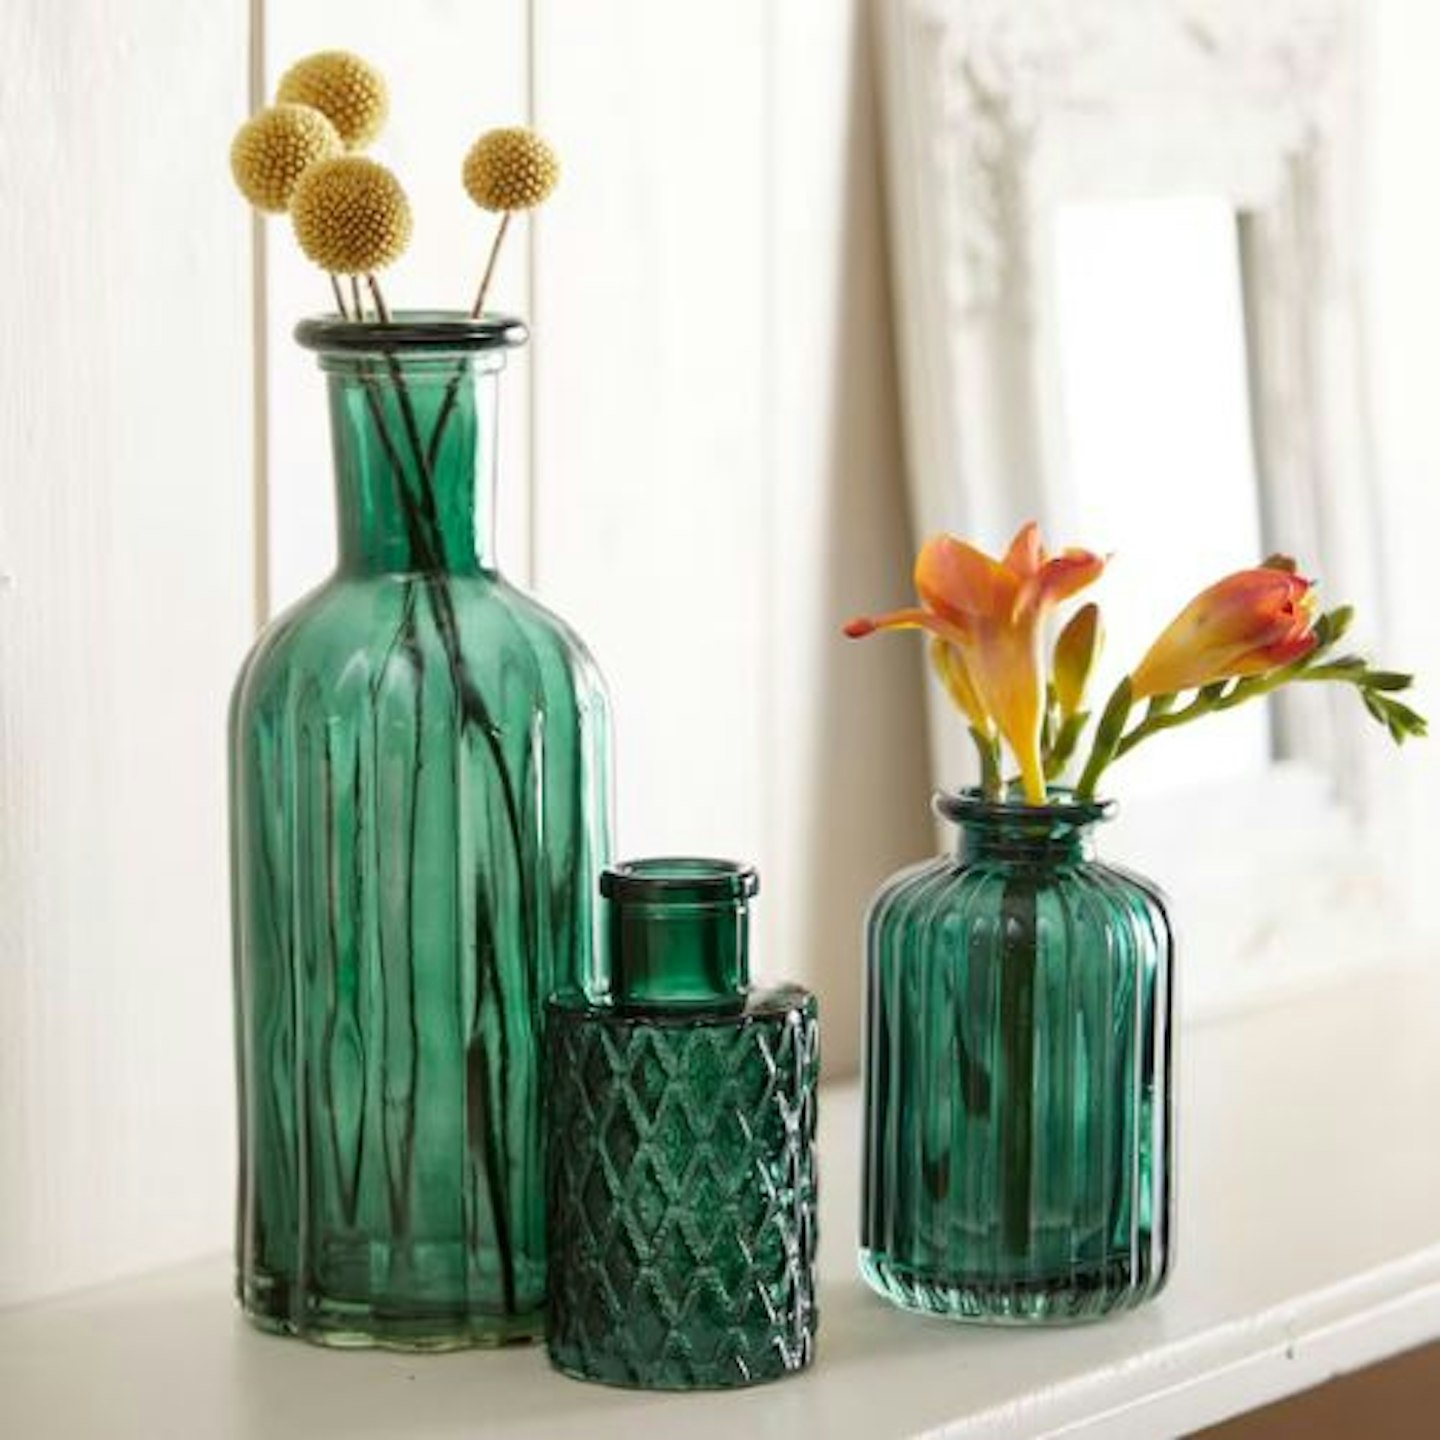 Set of 3 Assorted Glass Vases in Emerald Green